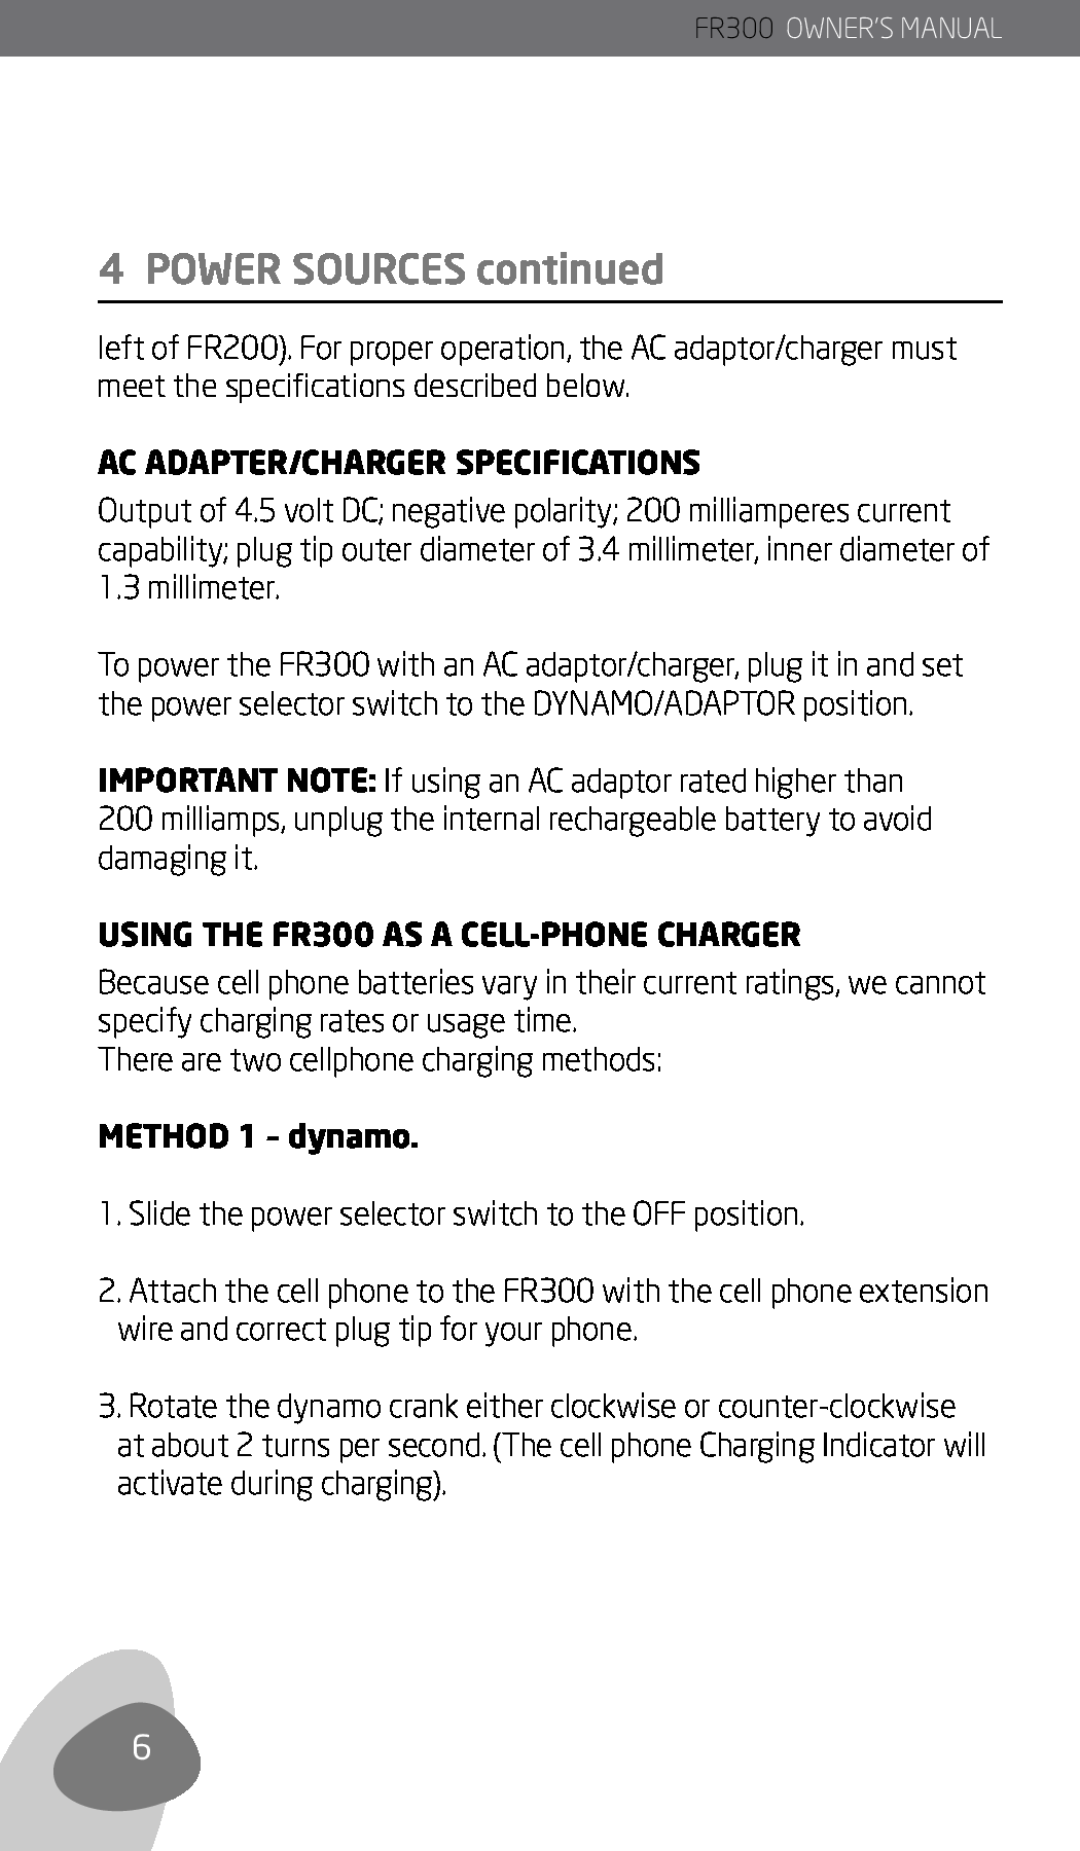 Eton owner manual Ac Adapter/Charger Specifications, USING THE FR300 AS A CELL-PHONECHARGER, METHOD 1 - dynamo 